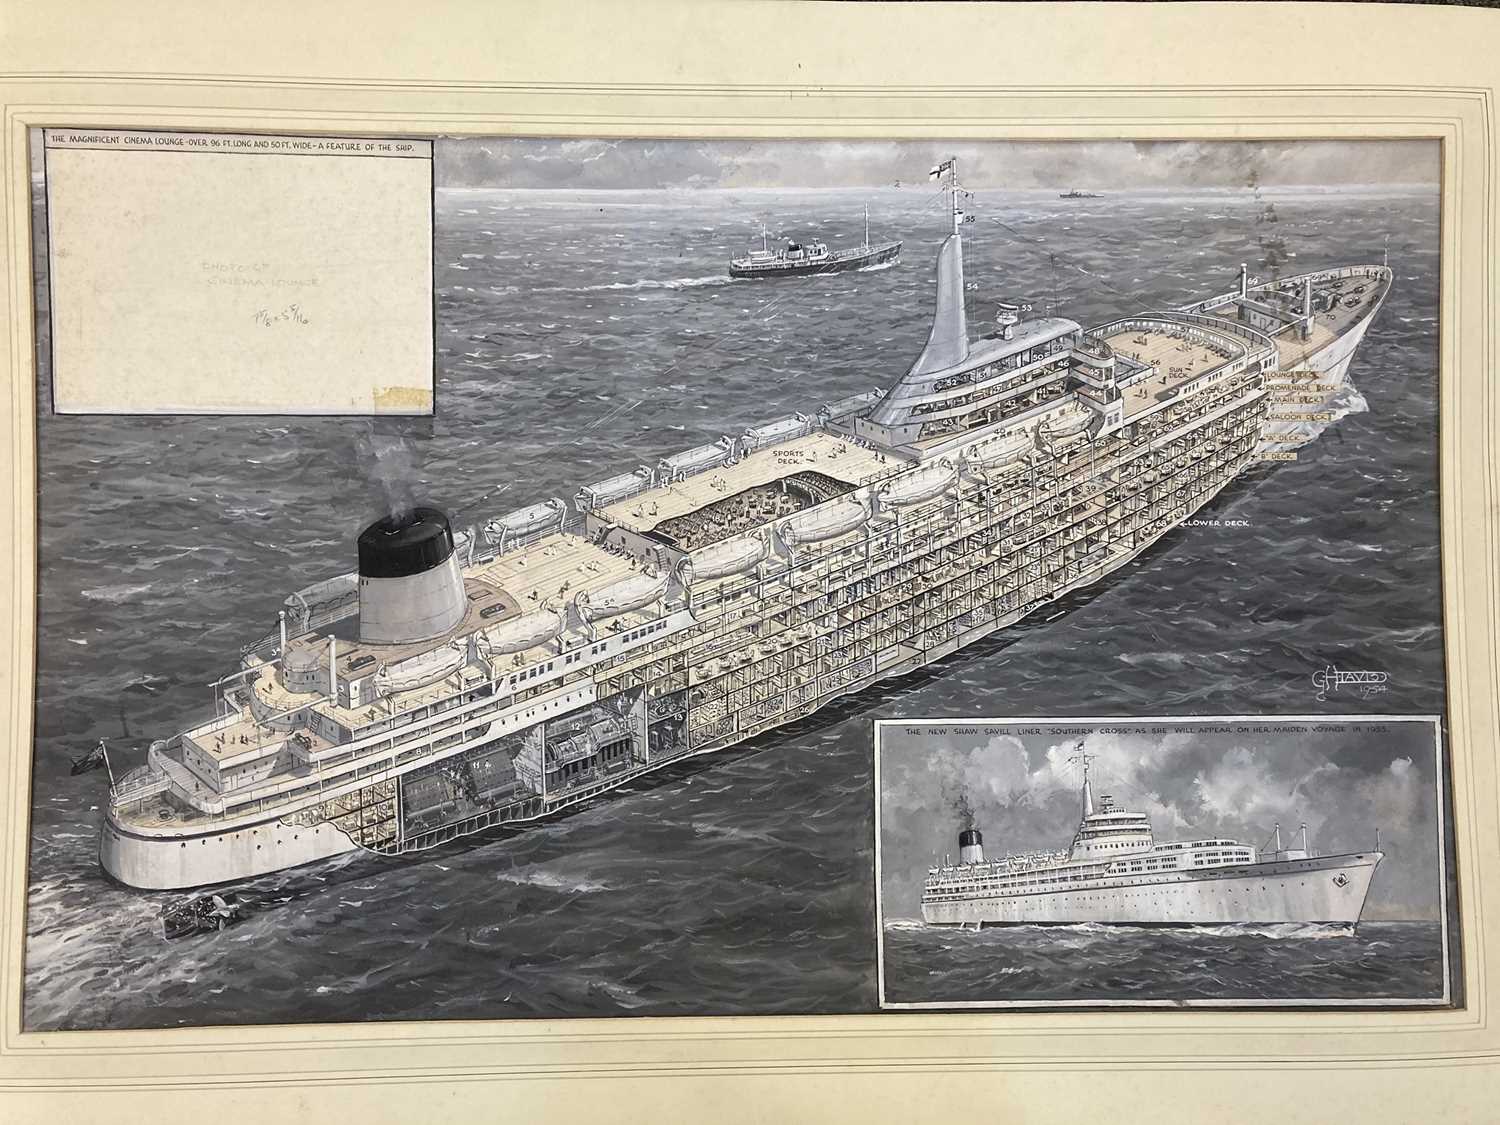 Lot 303 - Davis (G. H. 1881 - 1963). Cross-sectional drawing of a liner, 1954